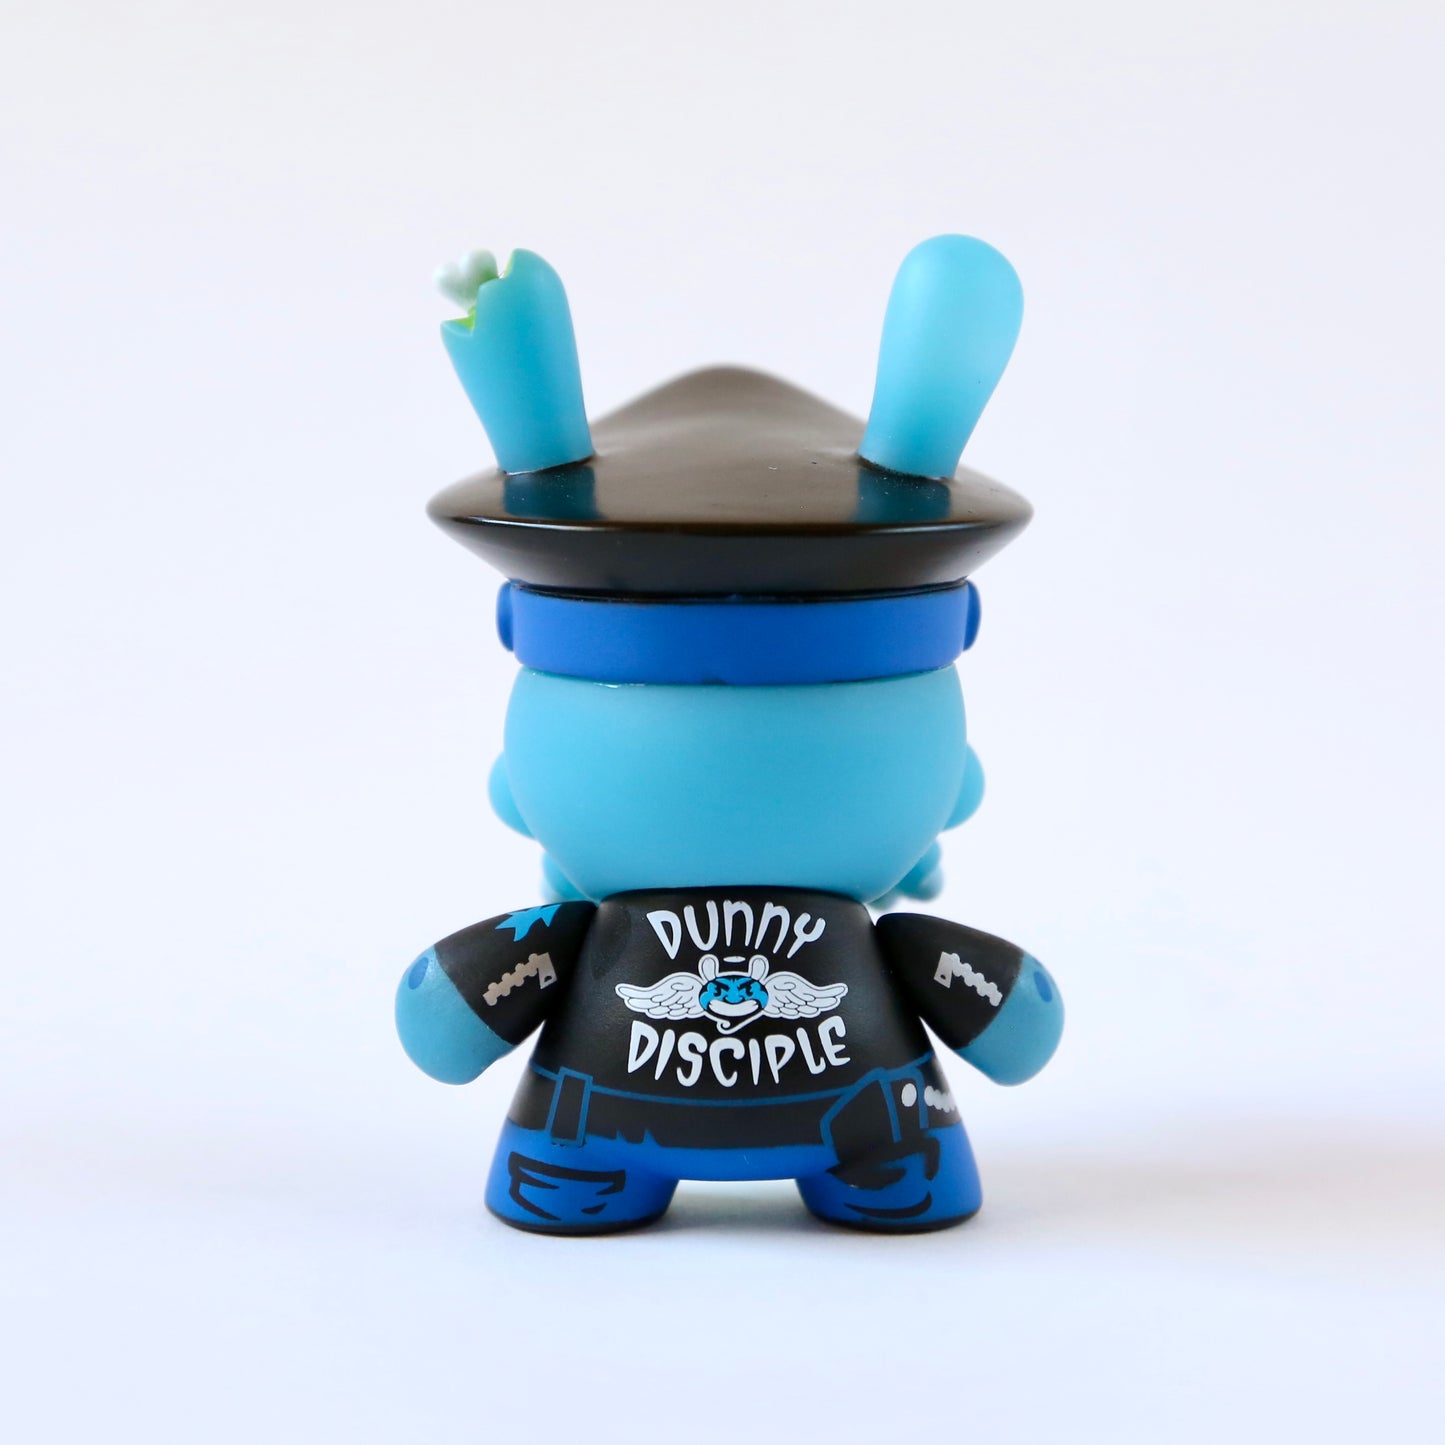 "Zombie Biker (Blue)" (1/20) 3in Dunny by MAD x Kidrobot